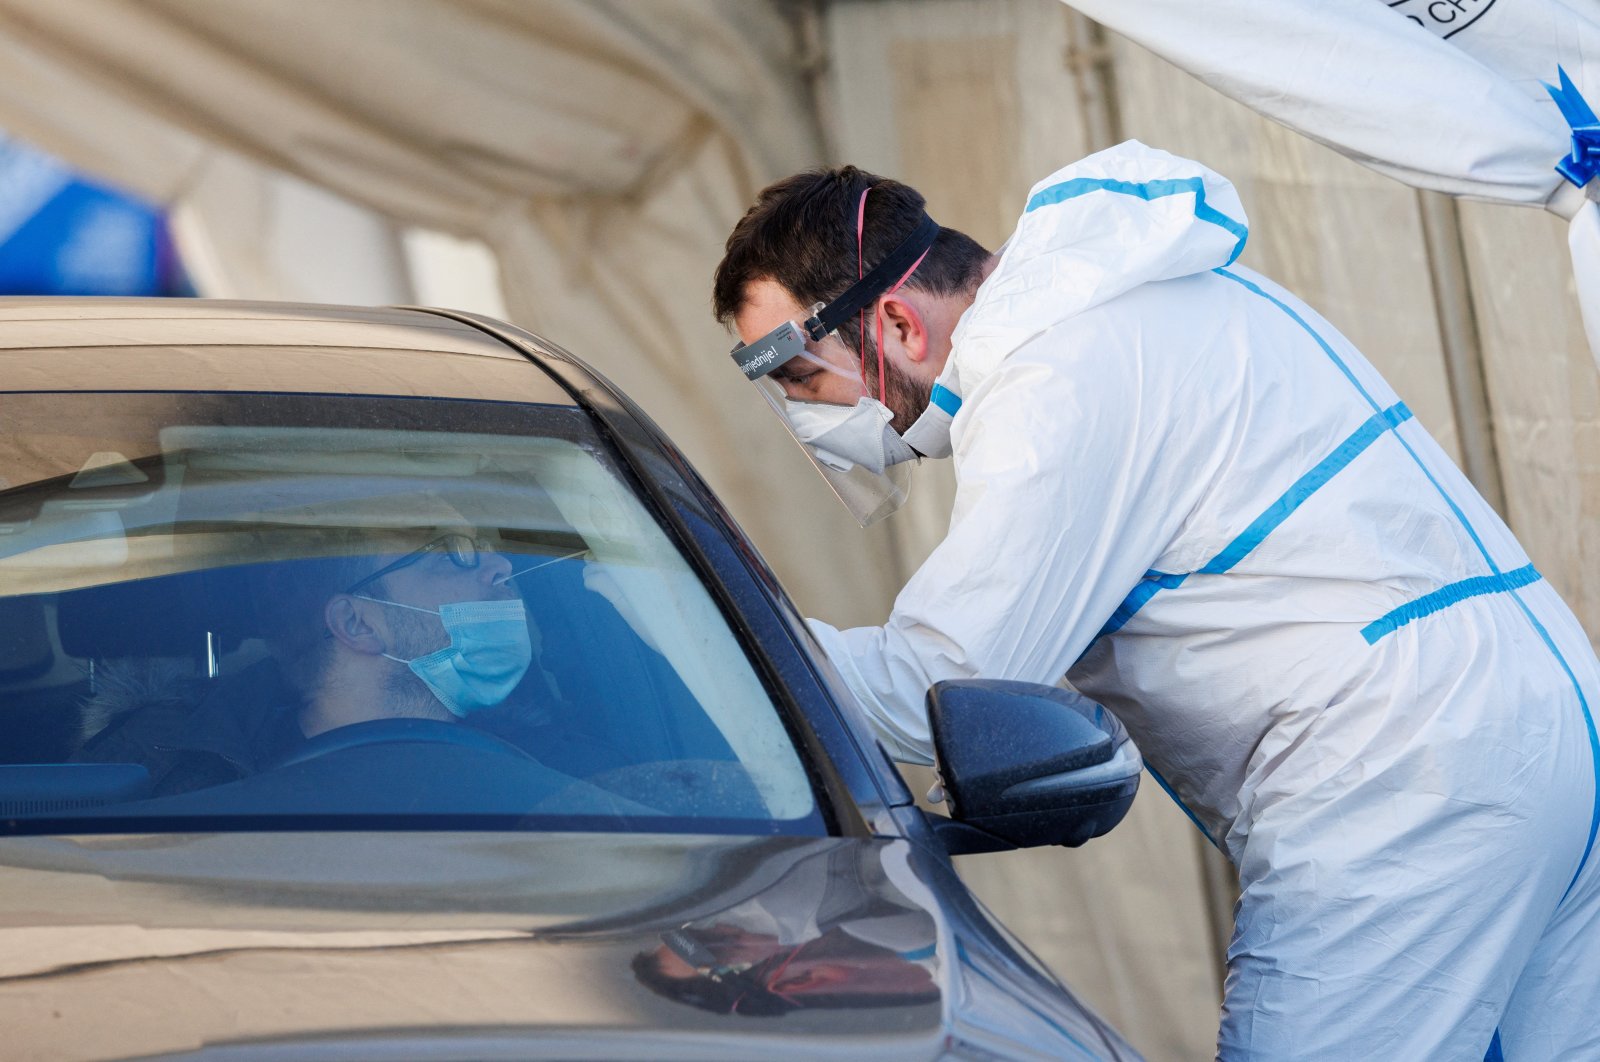 A man is tested for COVID-19 by a medical worker at a drive-in testing site during the coronavirus disease (COVID-19) pandemic, in Zagreb, Croatia, Jan. 7, 2022. (Reuters Photo)